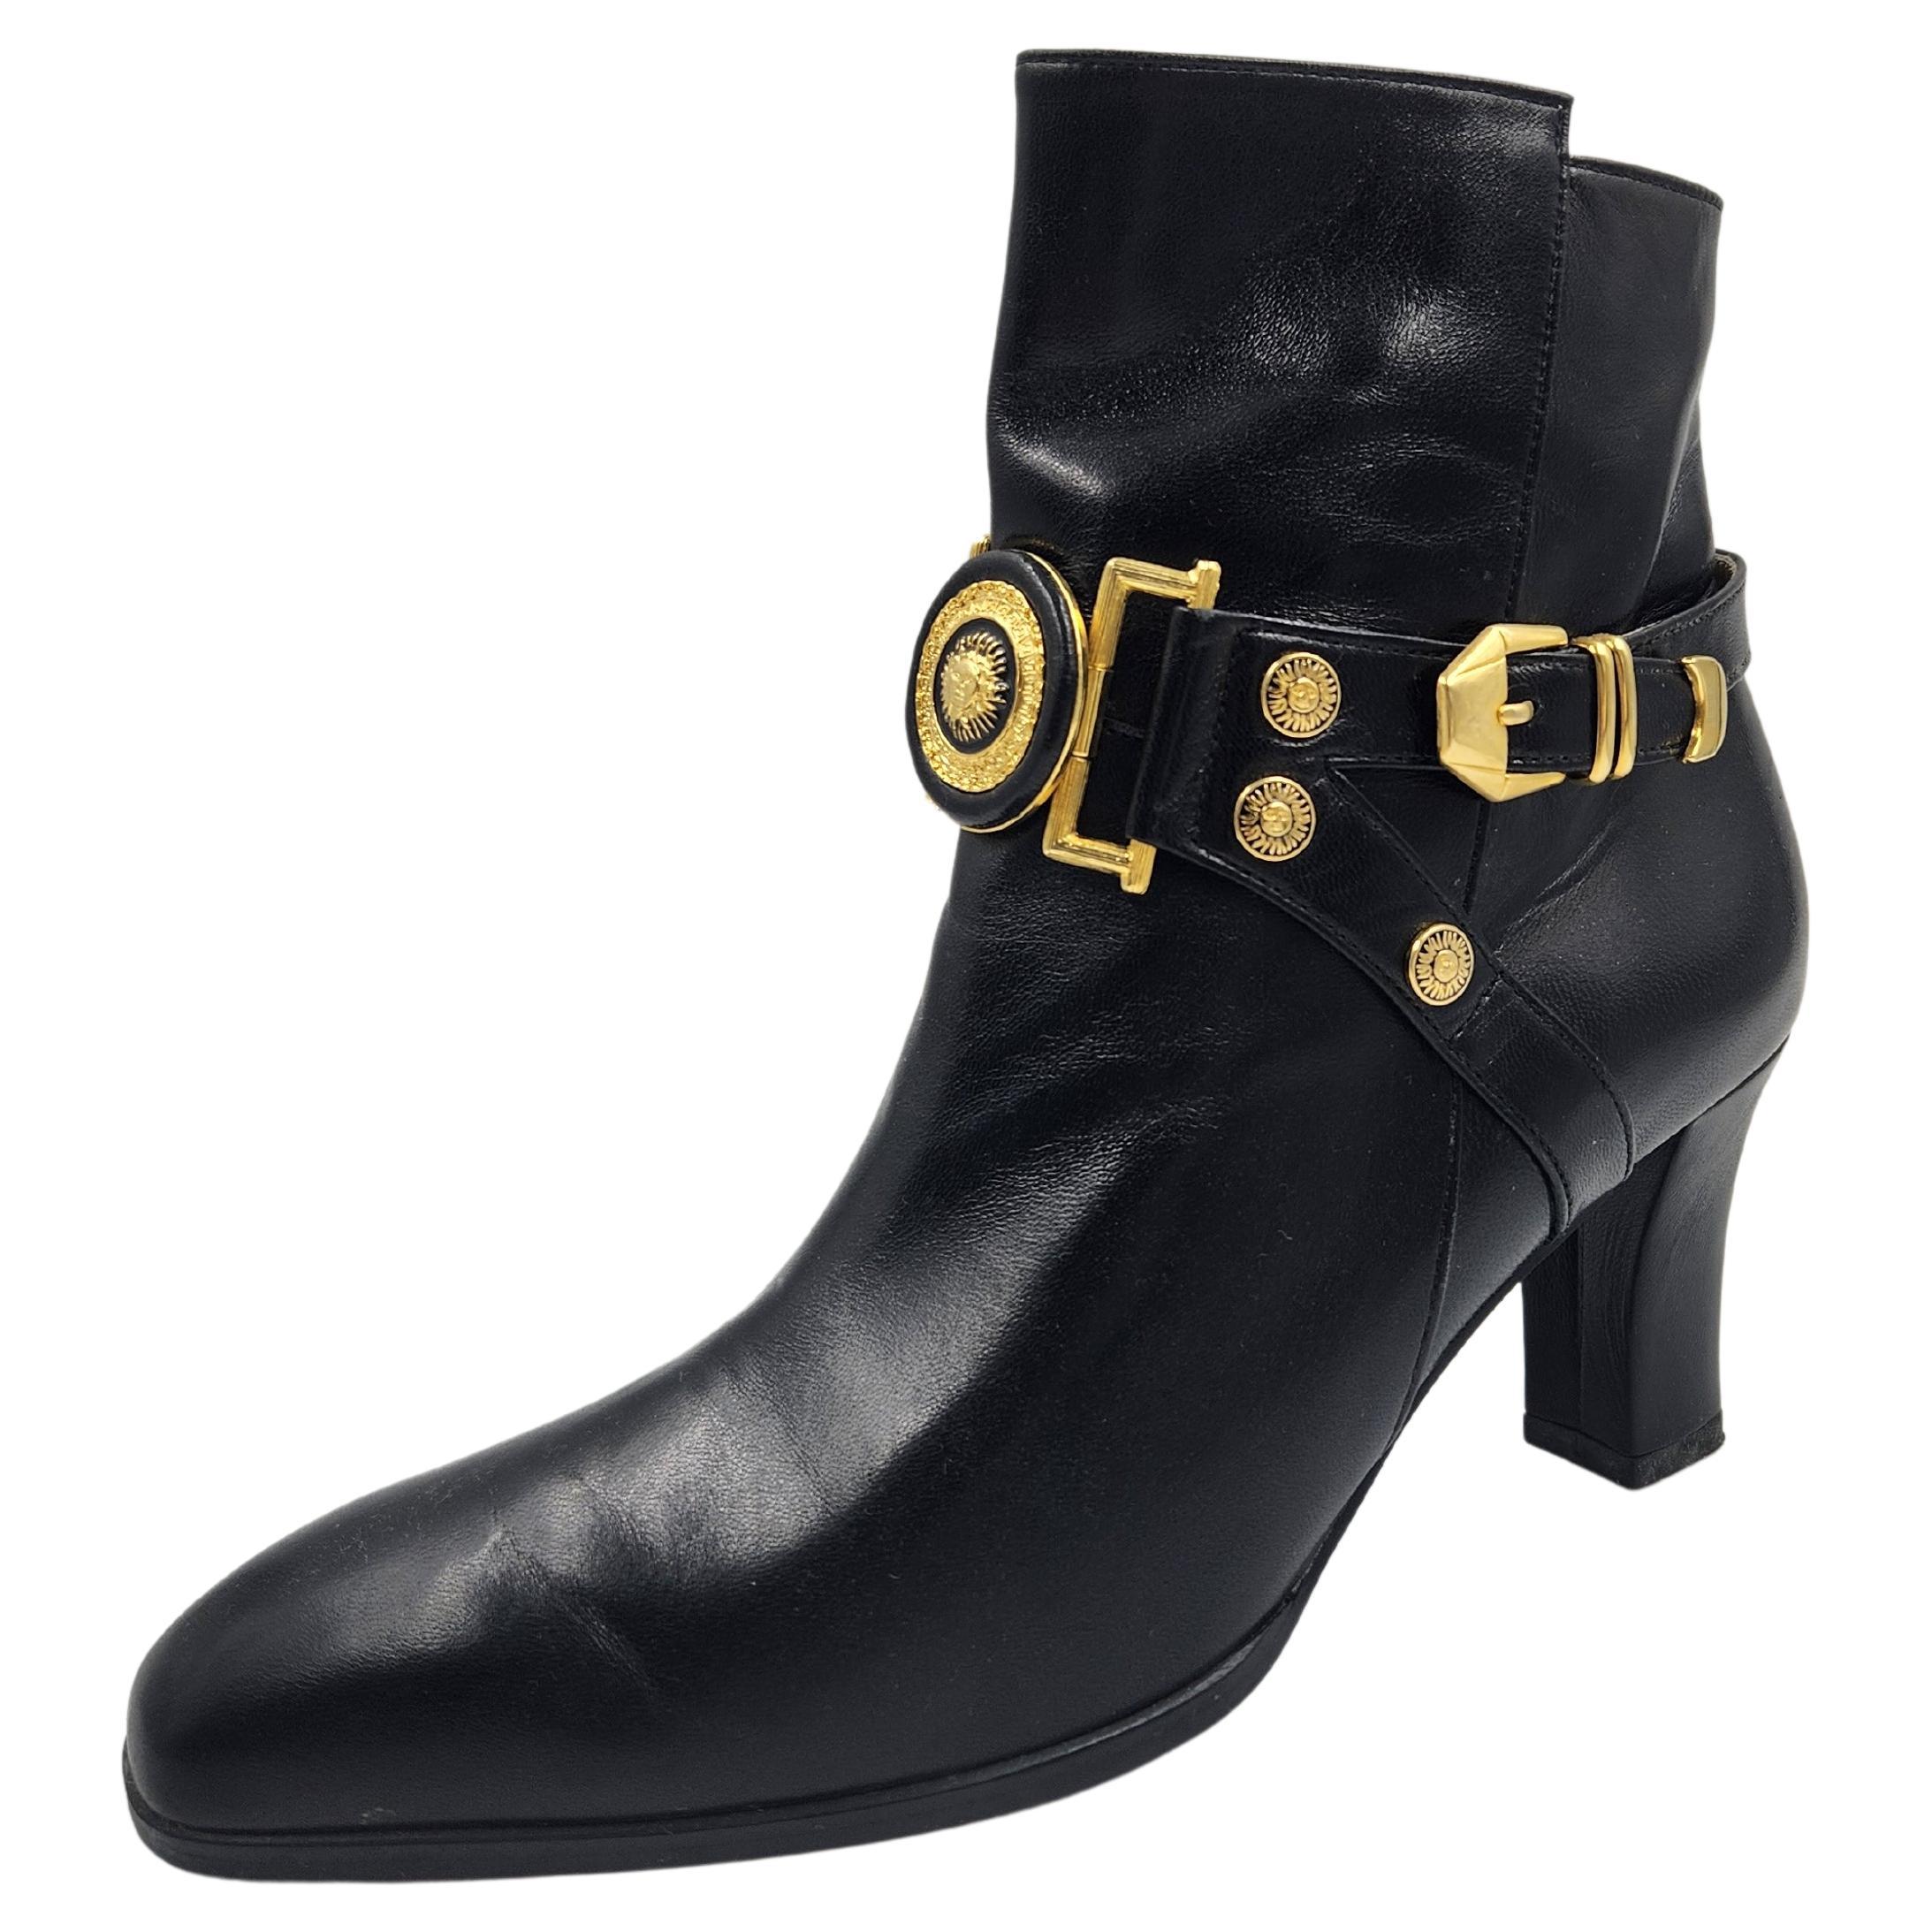 1990's Gianni Versace Gold Medallion Sun Chaussures Femme Vintage 36 Ankle Boots